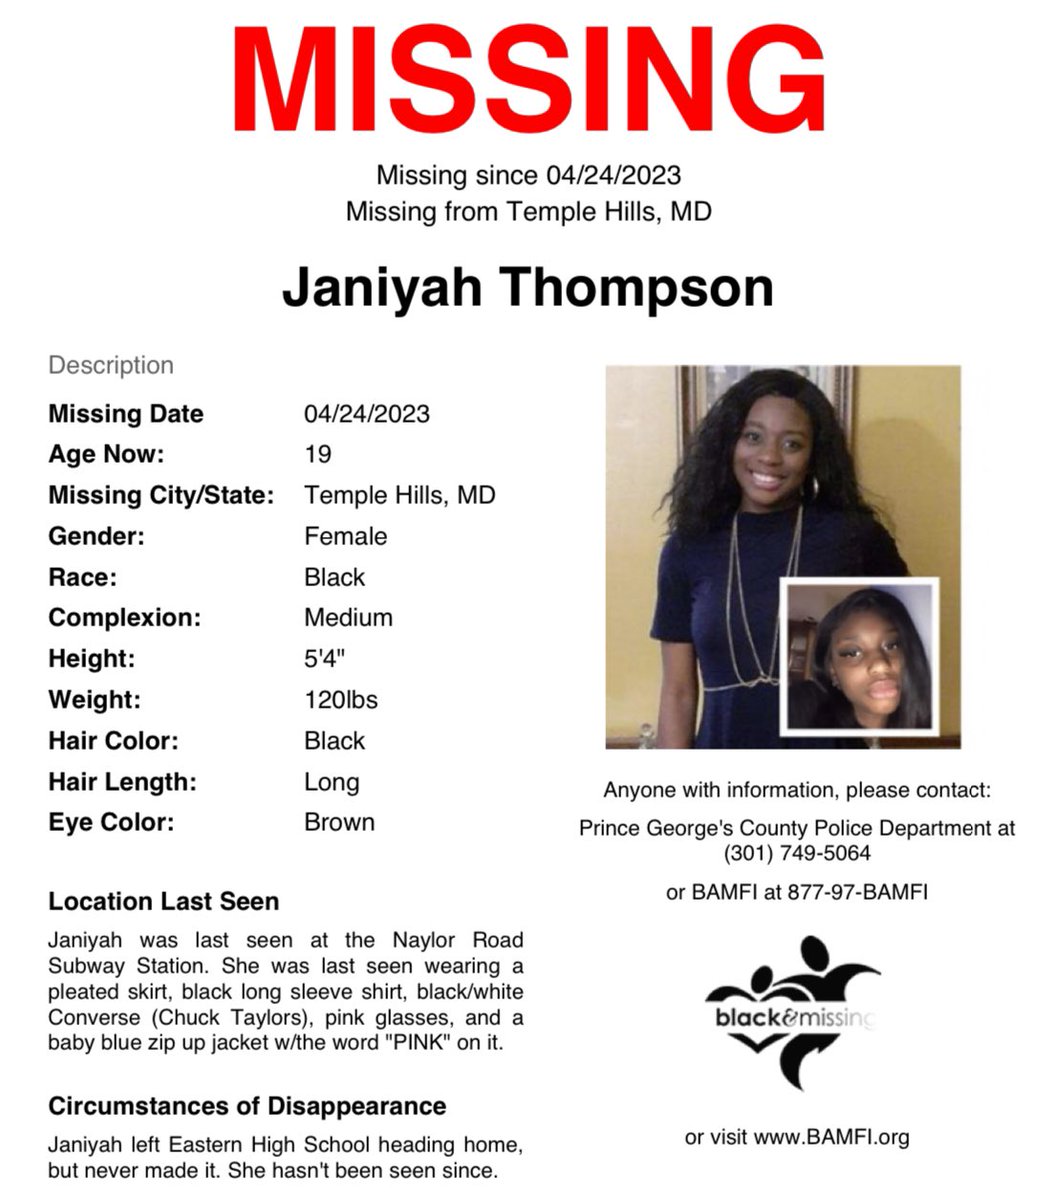 #TempleHills, #MD: 19y/o Janiyah Thompson is STILL missing & has been since April 24th, 2023. She was last seen at the Naylor Rd Subway Station heading home from Eastern High School but never made it. She hasn’t been seen since. #HelpUsFindJaniyahThompson #JaniyahThompson